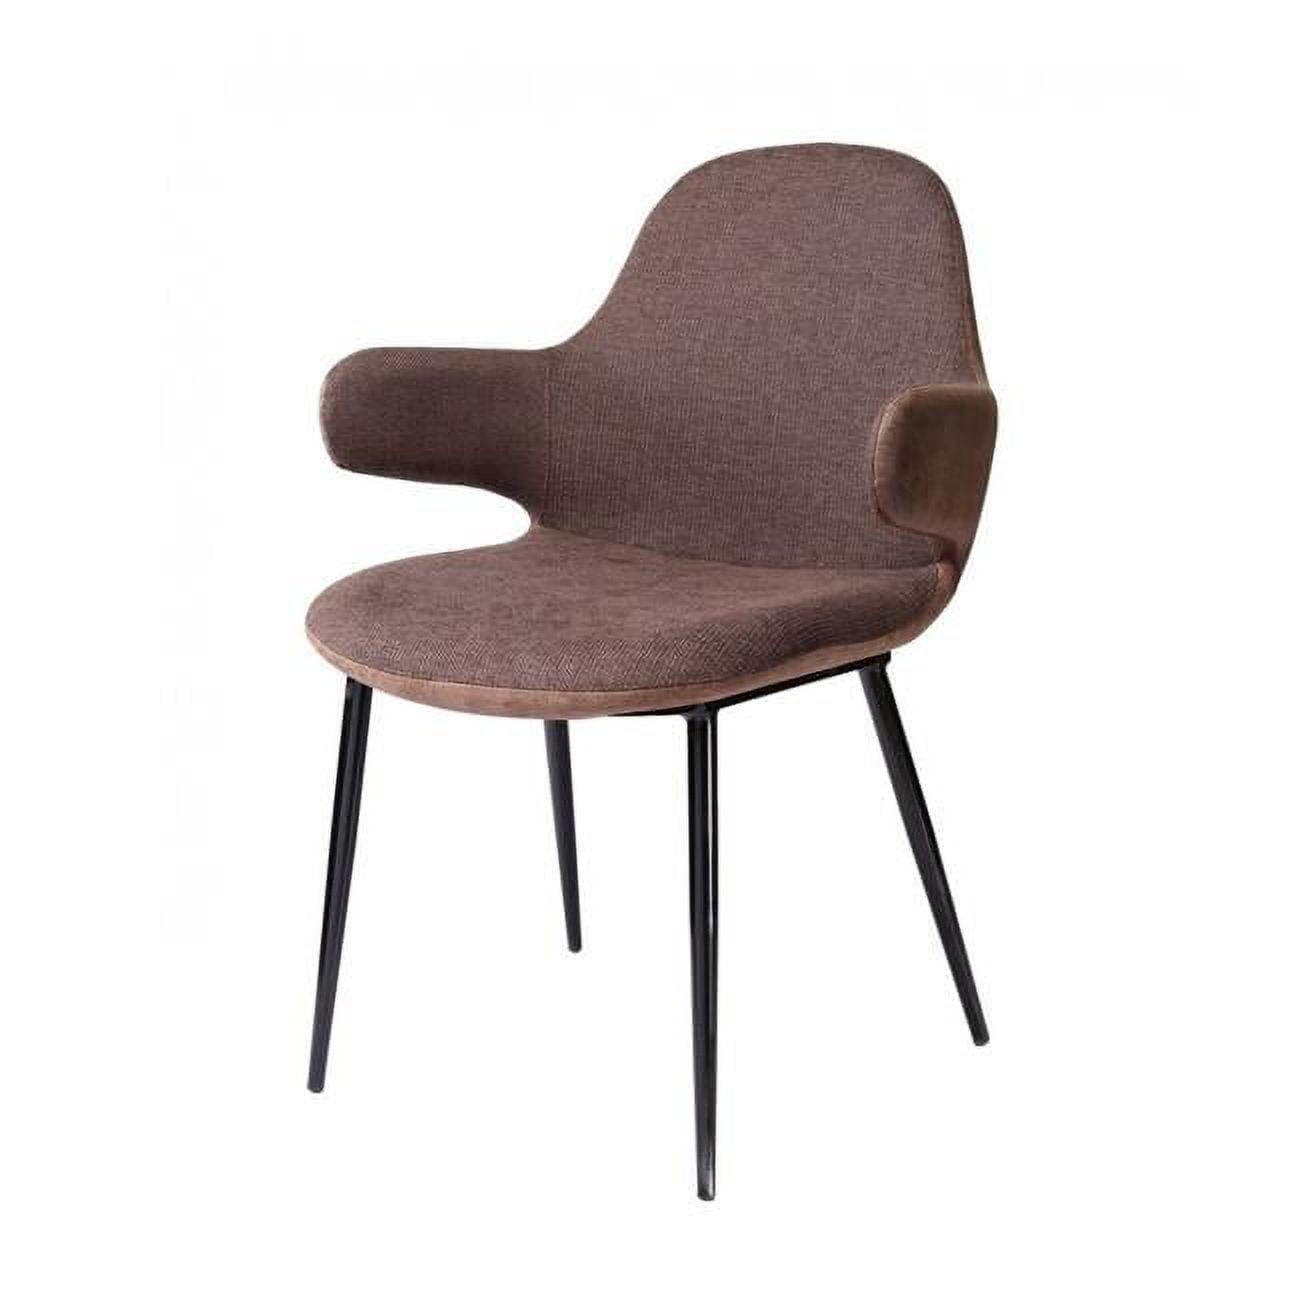 Modern Two-Tone Brown Faux Leather Accent Chair with Metal Legs